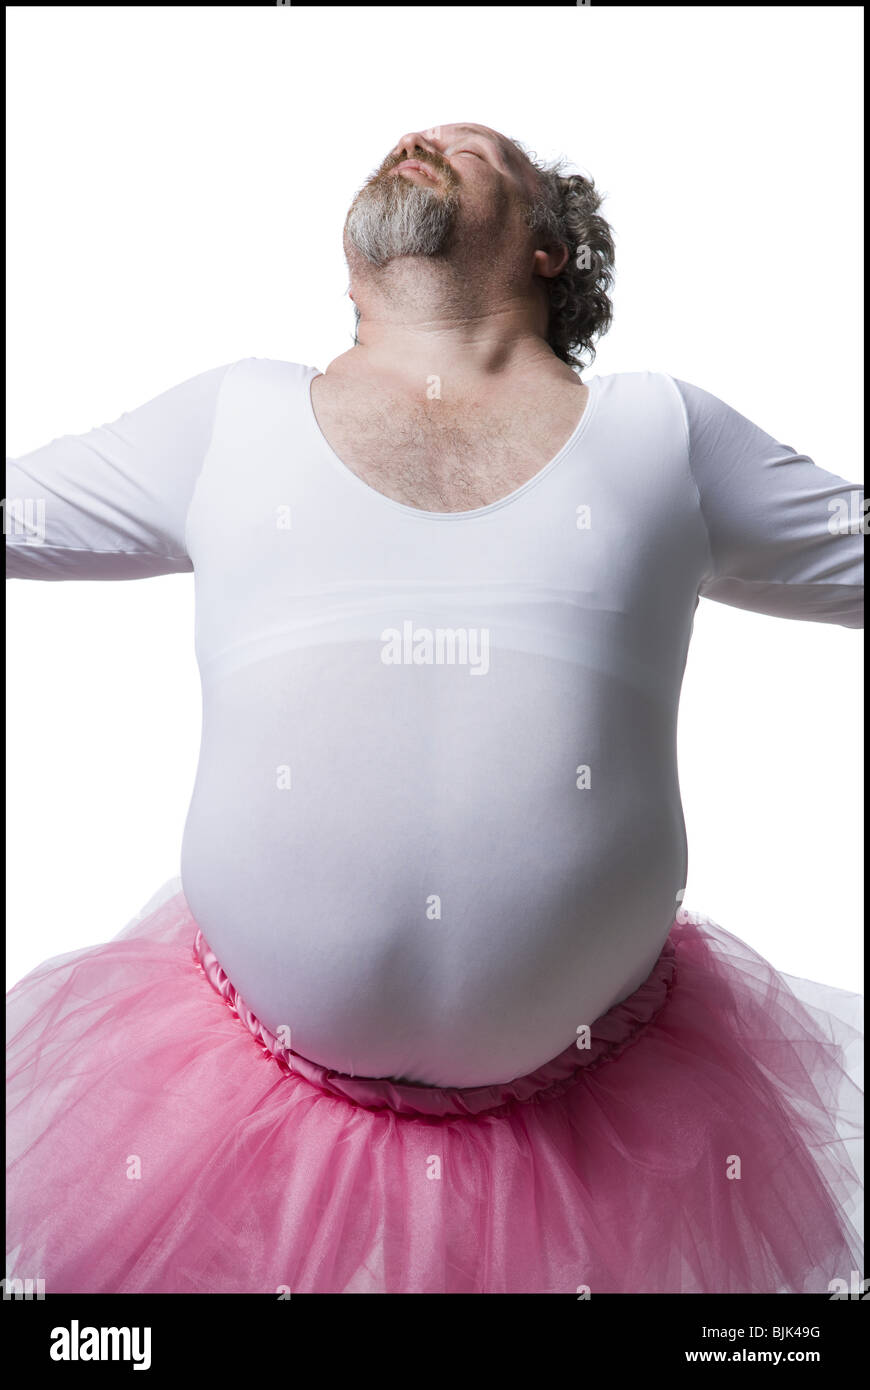 Obese man in tutu with wand dancing Stock Photo